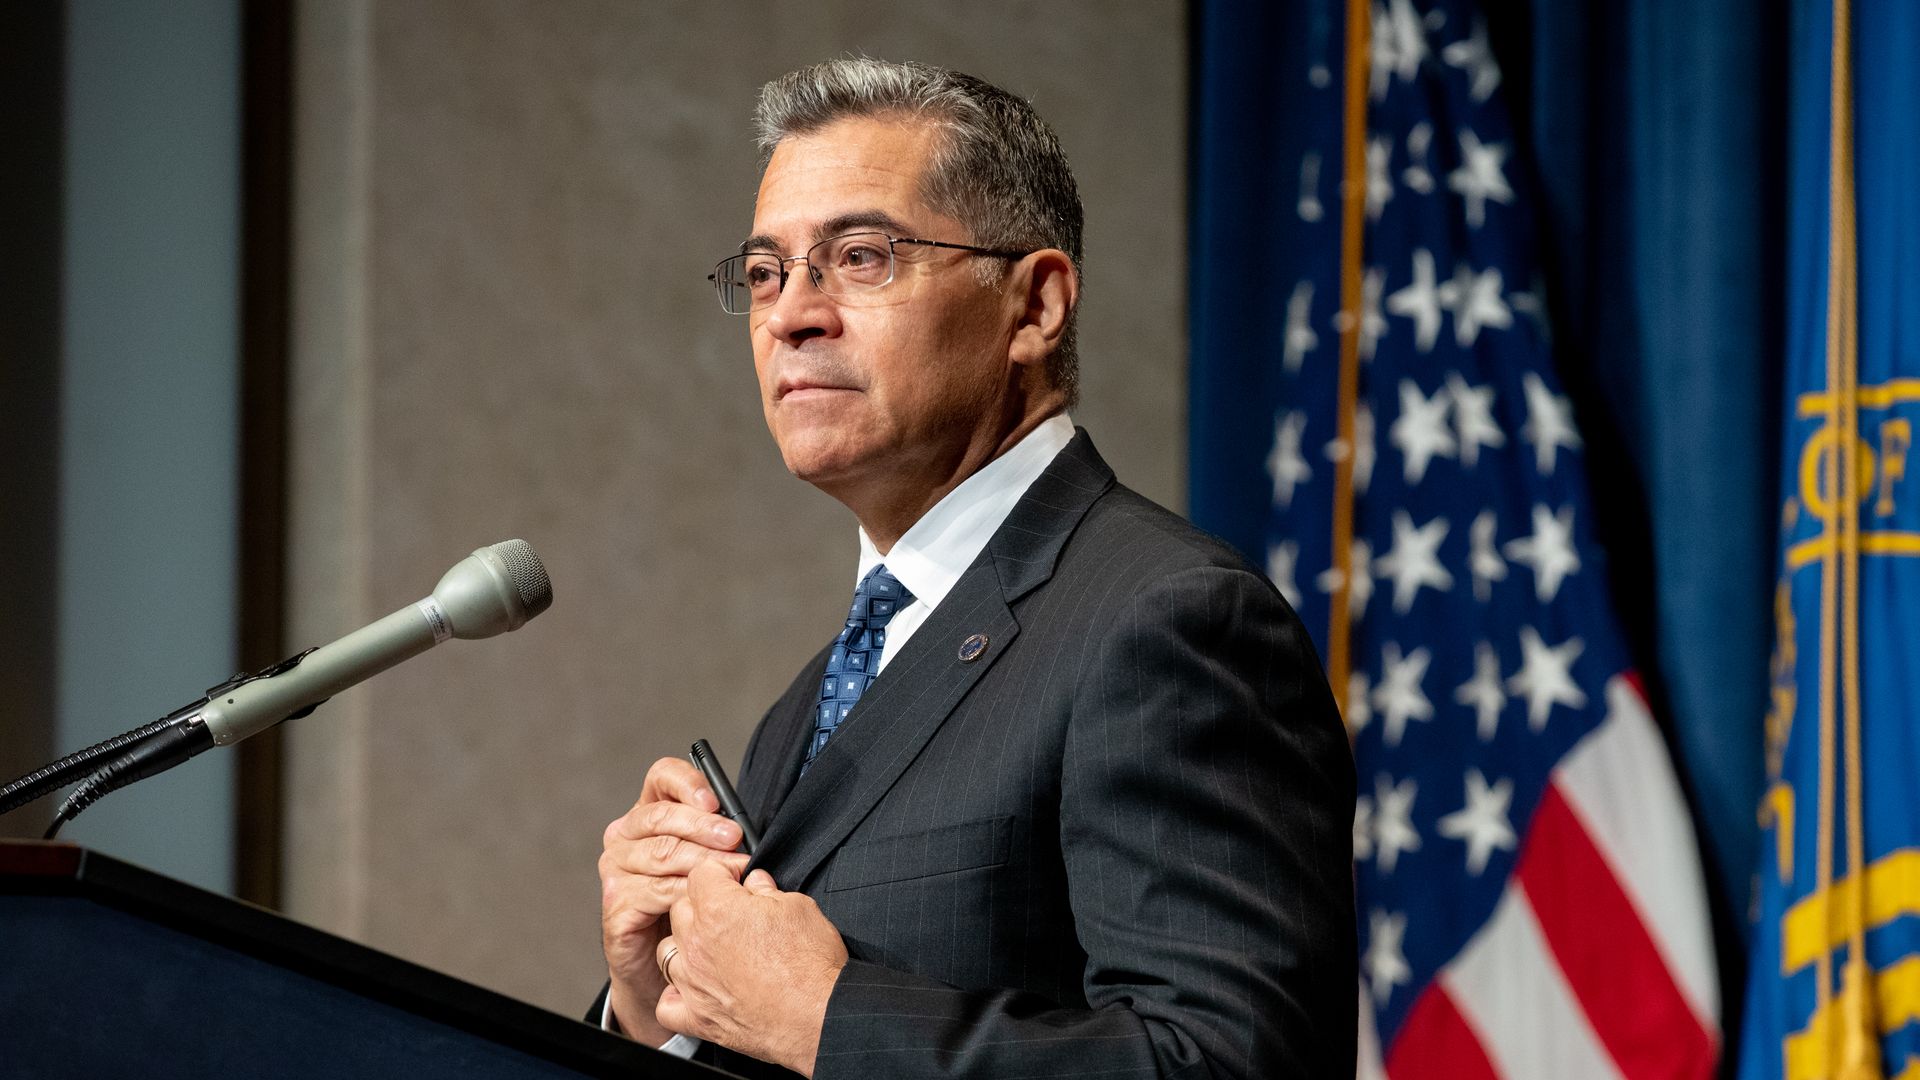 Xavier Becerra, secretary of Health and Human Services, speaks at a news conference.